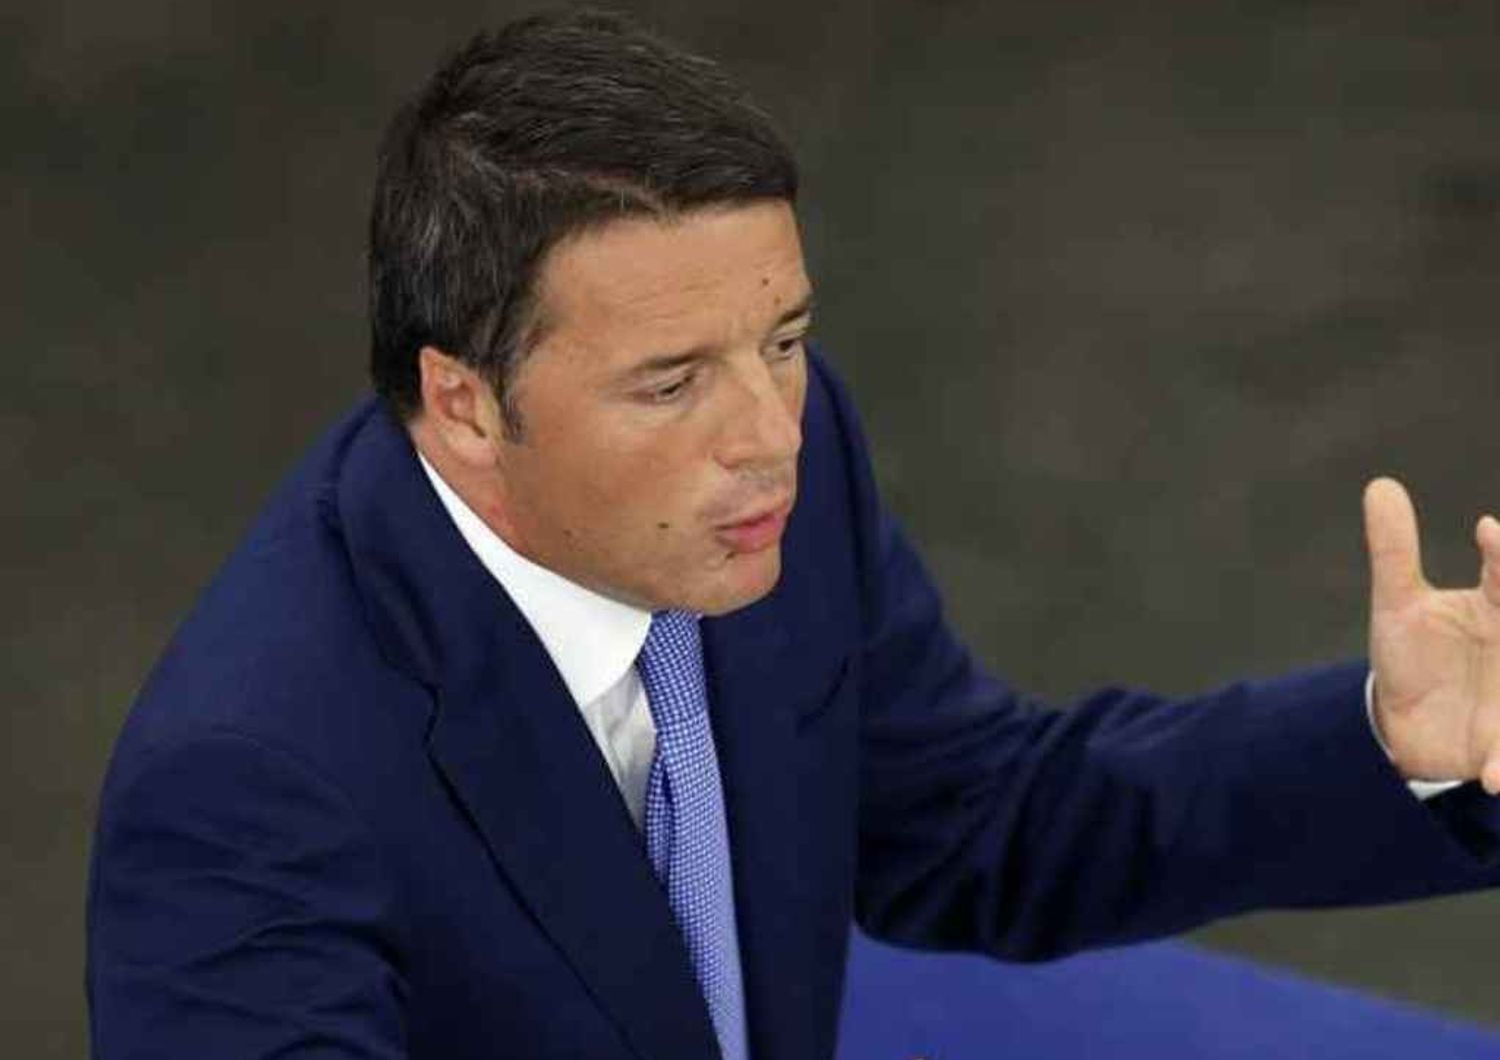 Italy wants to give hope to EU citizens, says PM Renzi